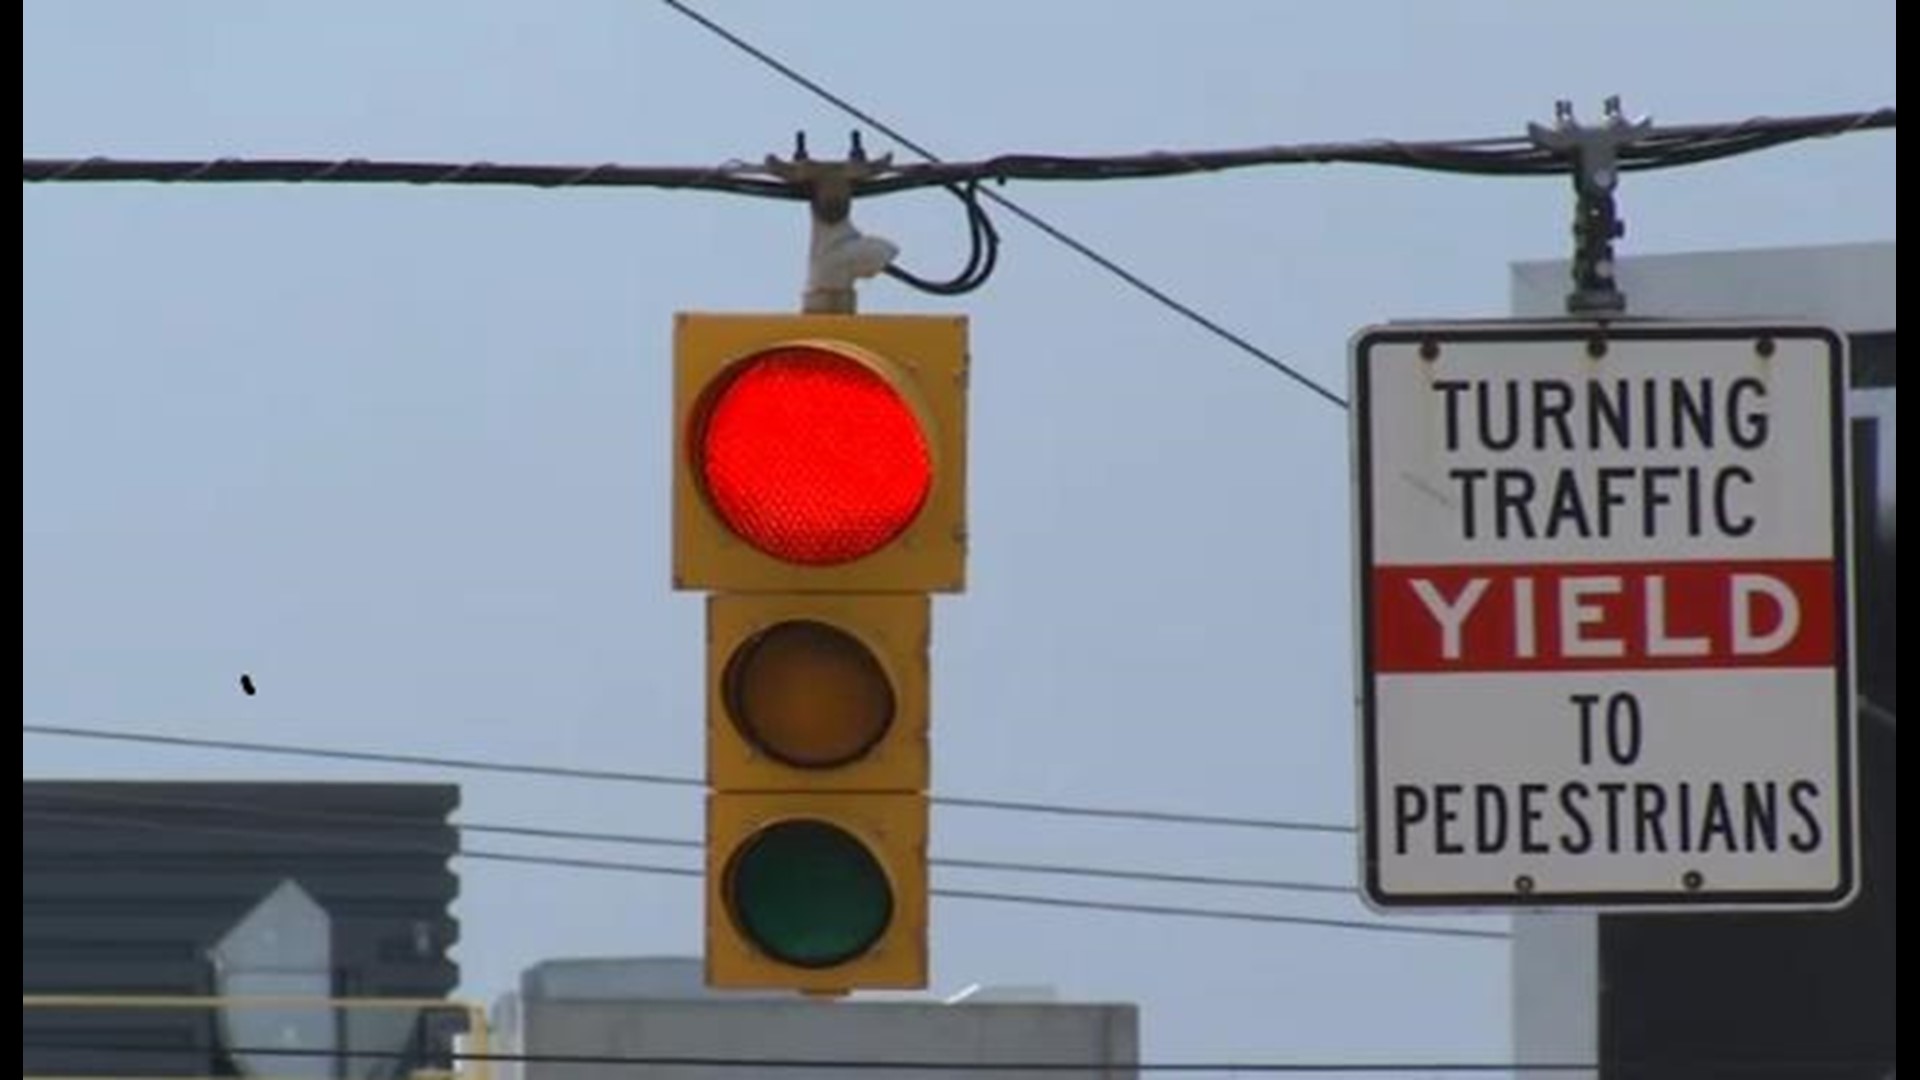 Ohio Lawmaker Asks For Red Light Camera Ban